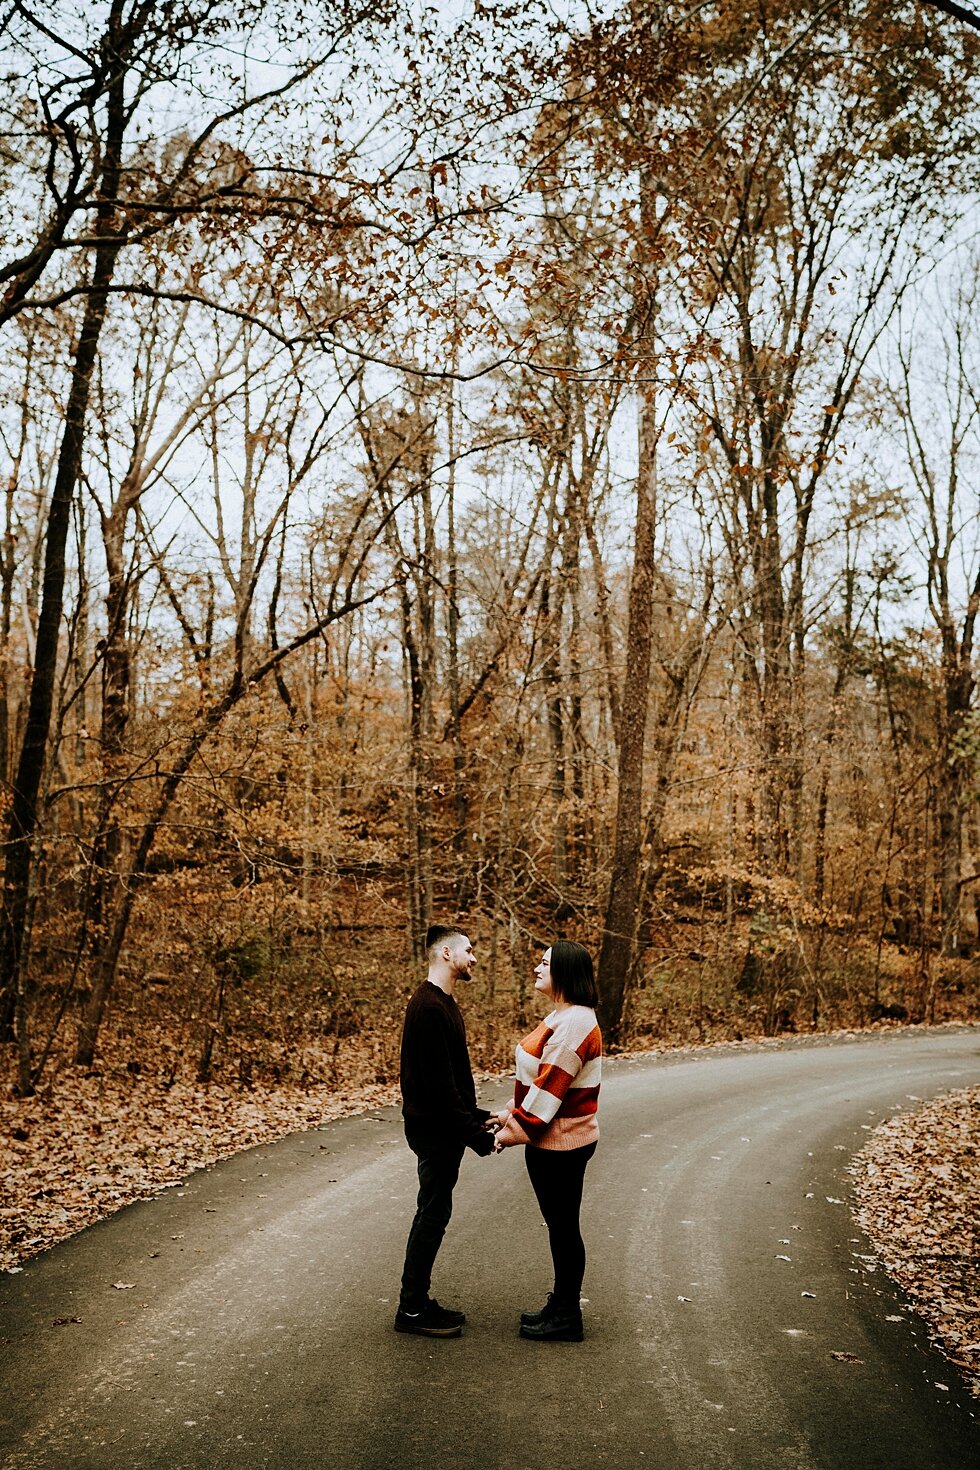  Middle of the road photo surrounded by trees with the engaged couple standing in the middle. #engagementgoals #engagementphotographer #engaged #outdoorengagement #kentuckyphotographer #indianaphotographer #louisvillephotographer #engagementphotos #s